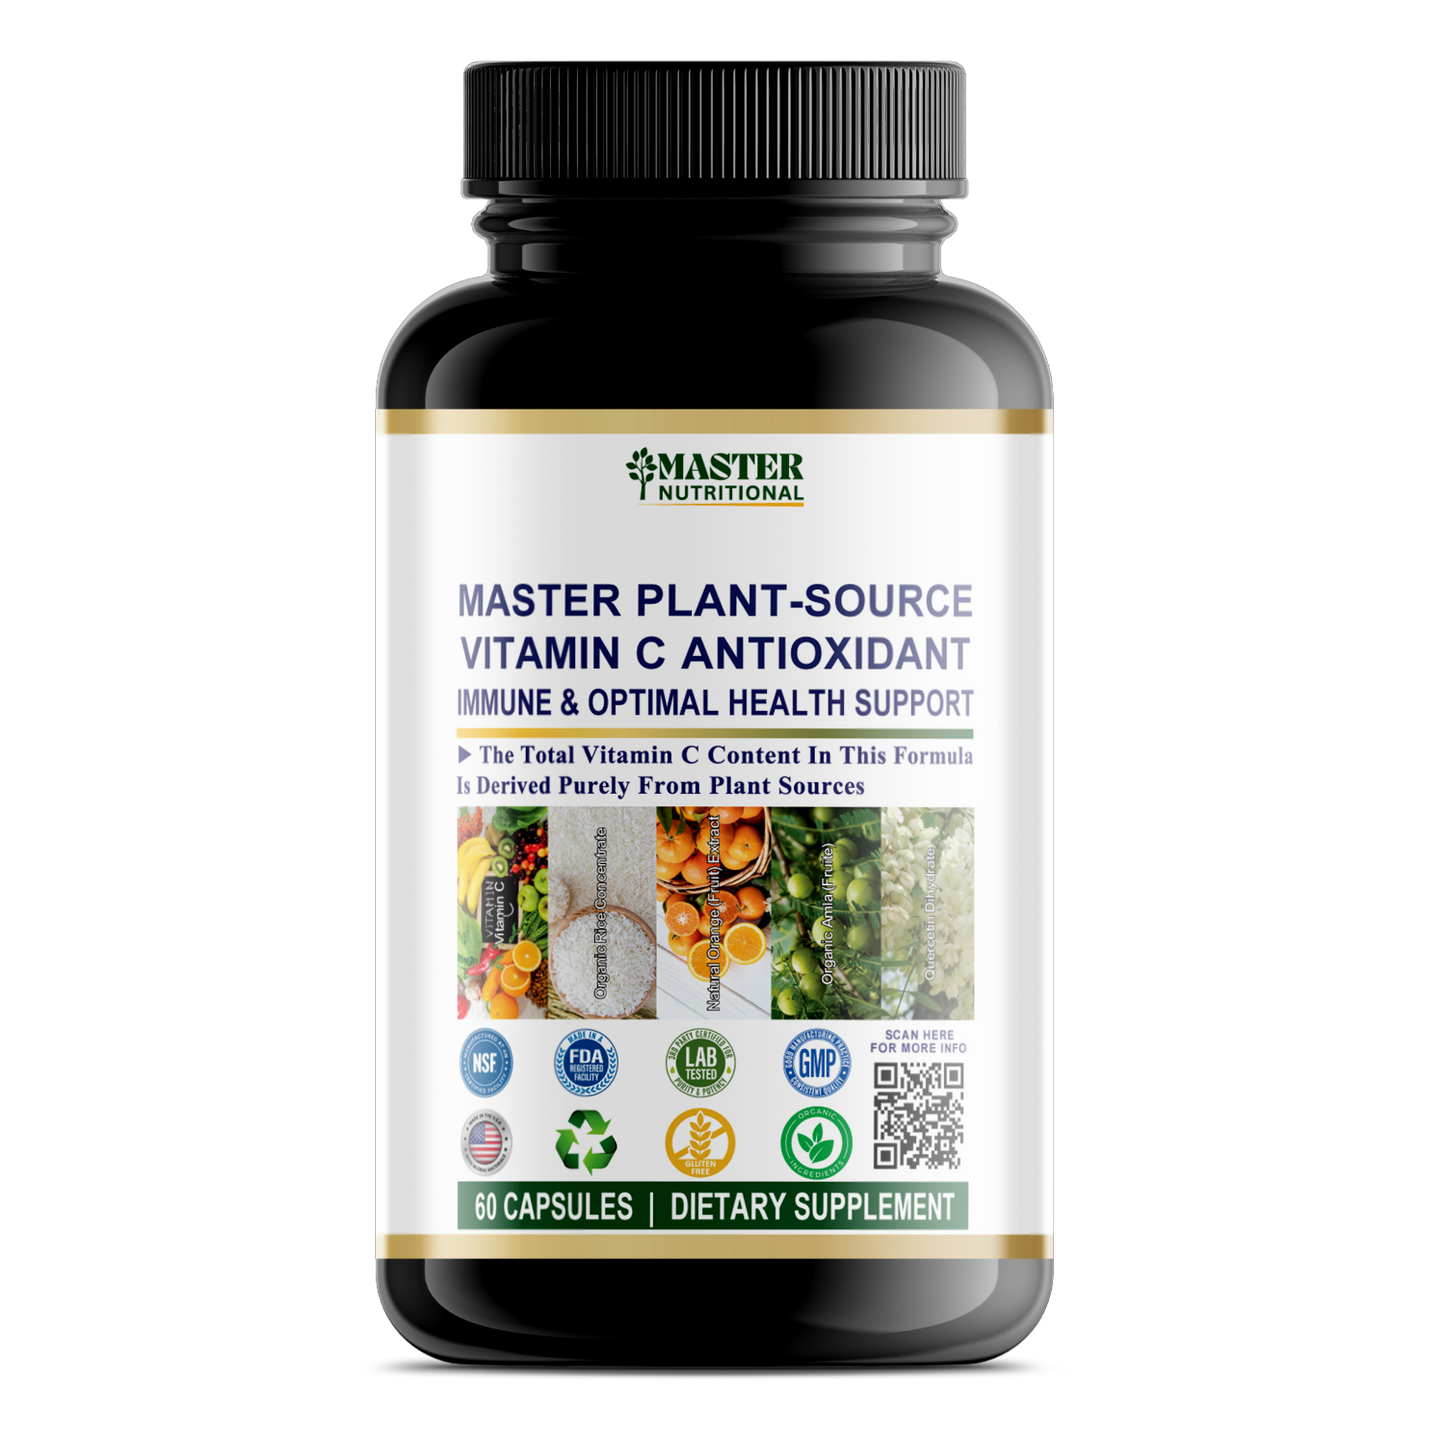 Master Plant-Source Vitamin C: A Powerful Vitamin for Enhancing Immunity and Vitality